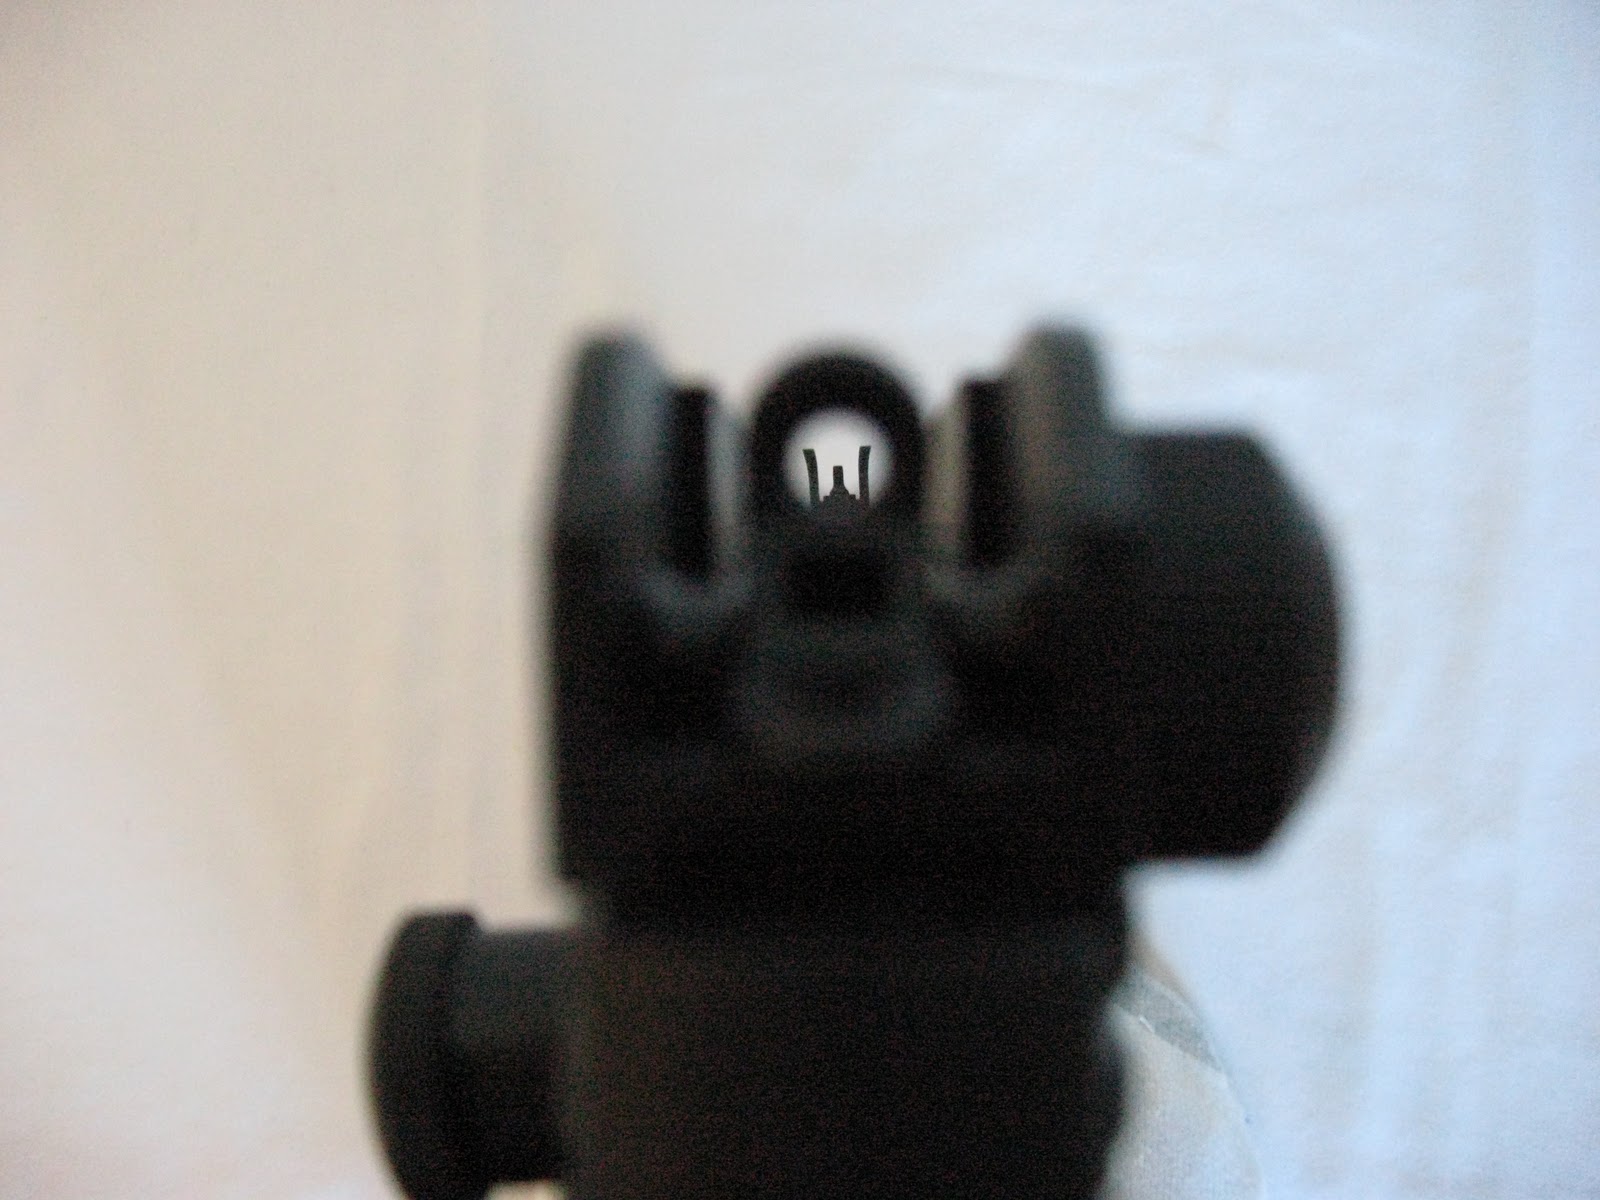 Airsoft Reviews And More Aim Down Sights Image Collection